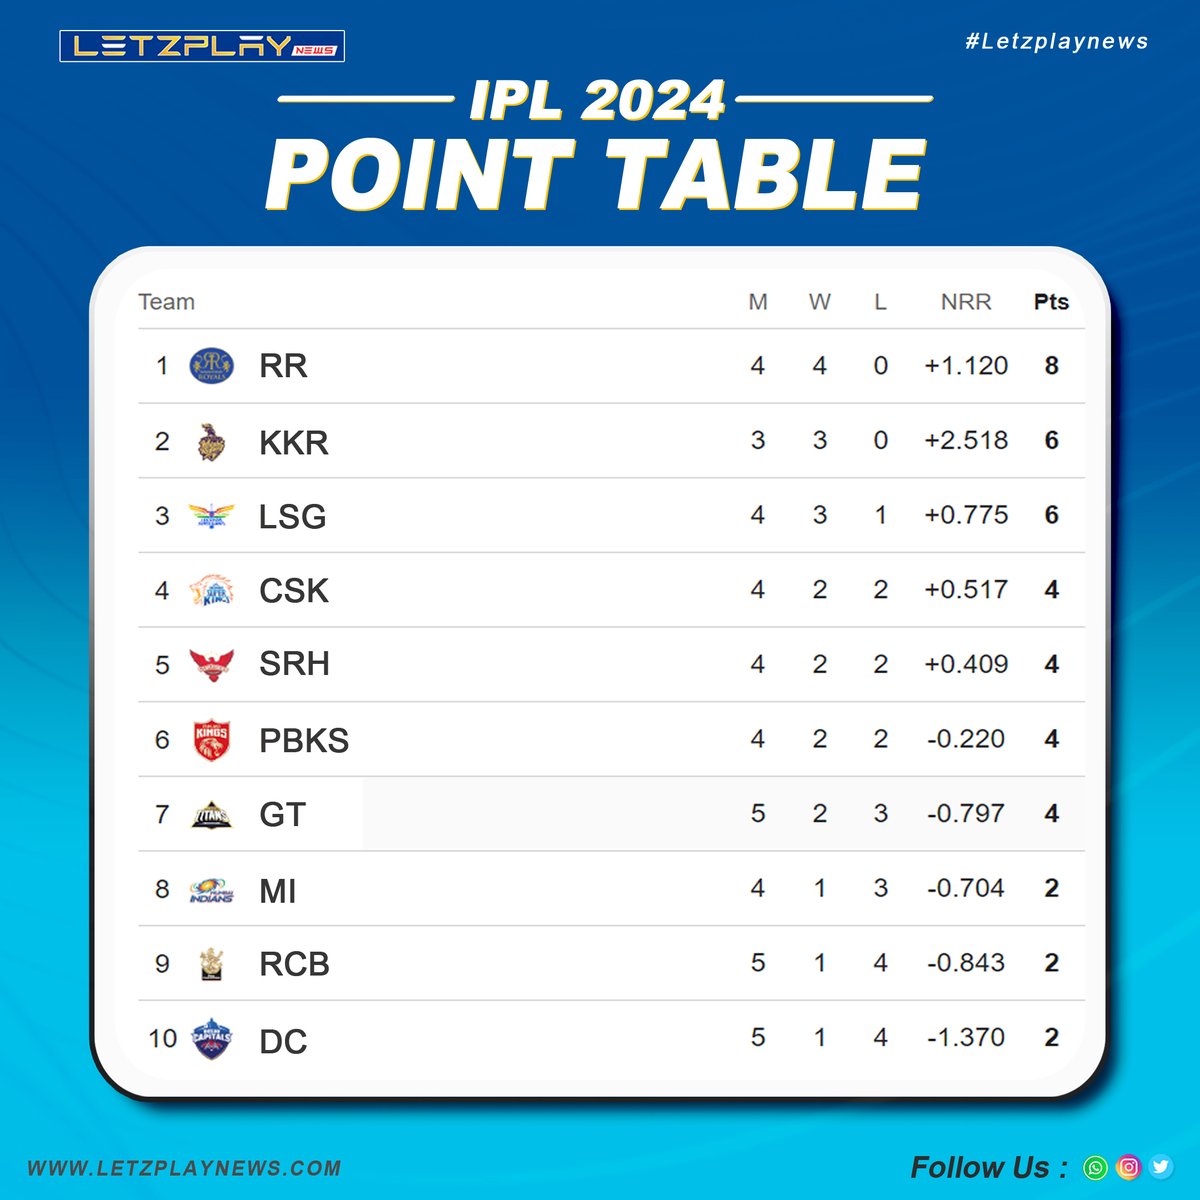 🚀 Rajasthan Royals soars to the top spot in the IPL 2024 Points table! 🥇

A commendable achievement for the team as they lead the charge! 🏏💥

#RR #IPL2024 #RajasthanRoyals #CricketLeaders #TopOfTheTable #CricketFever #ChampionSpirit 🌟